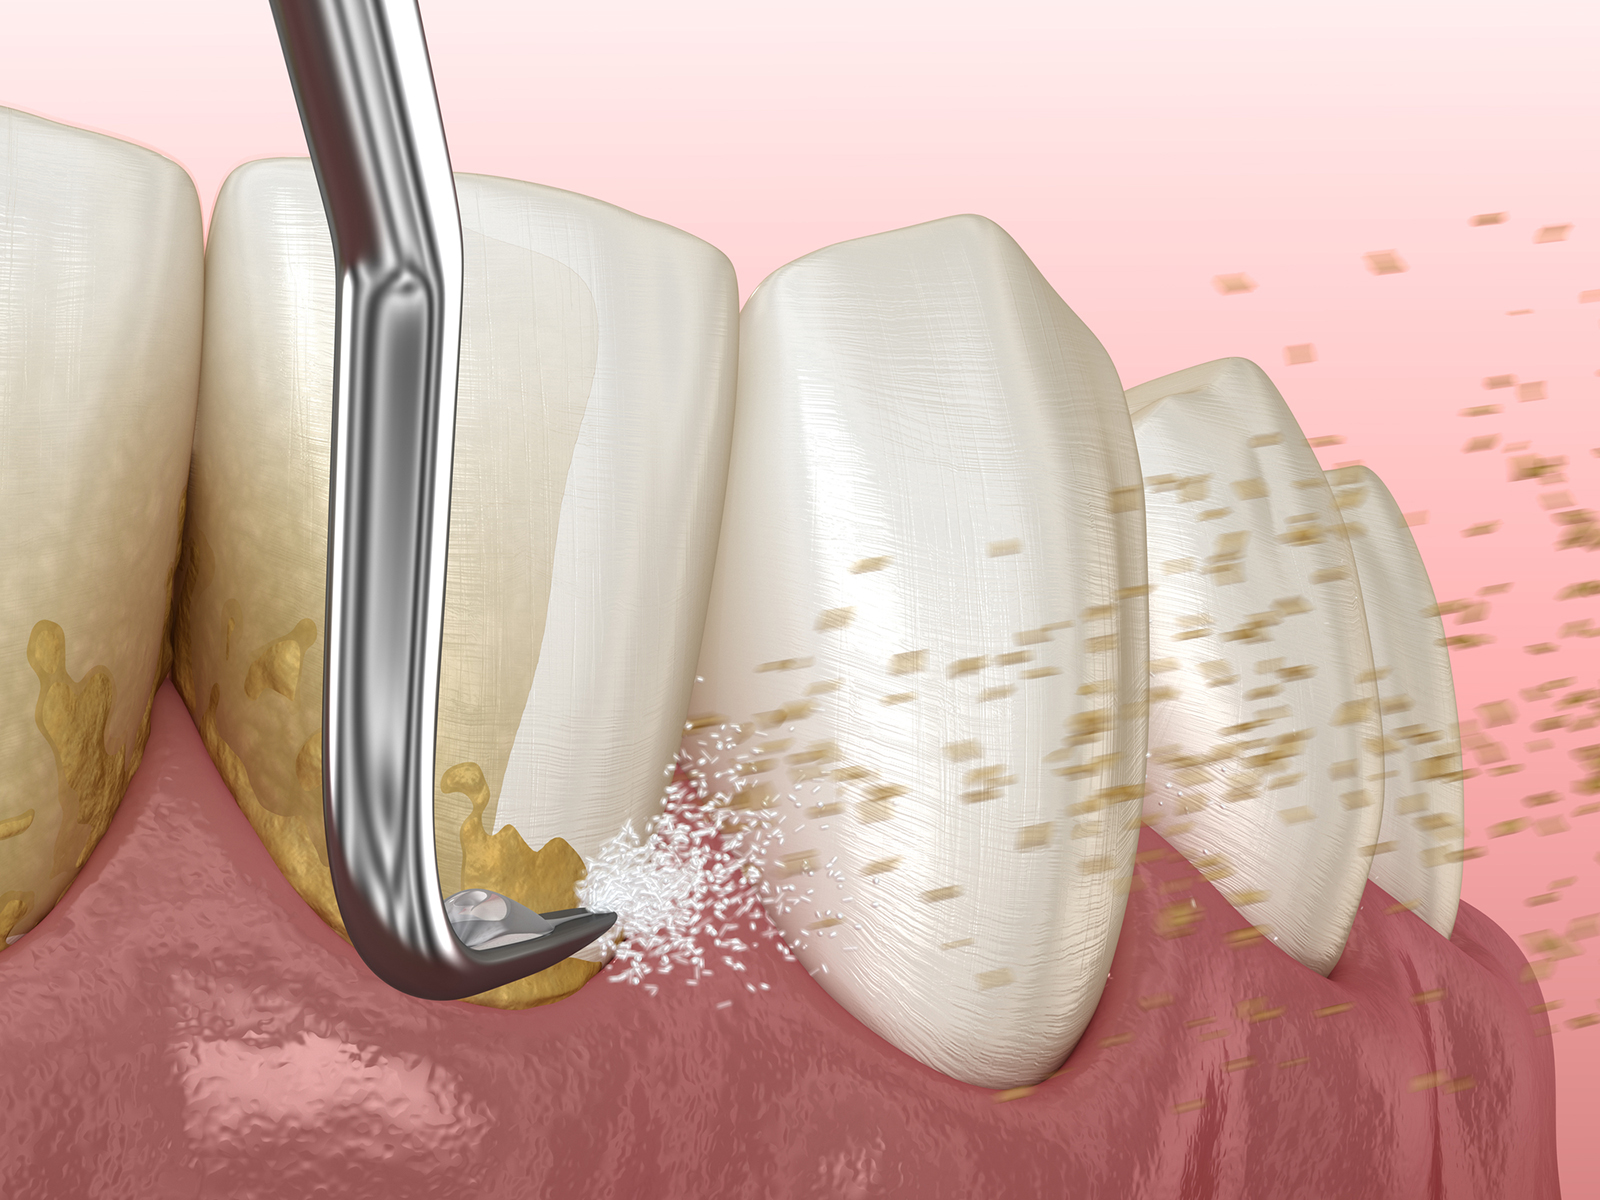 Can Scaling And Root Planing Help In Treating Receding Gums?